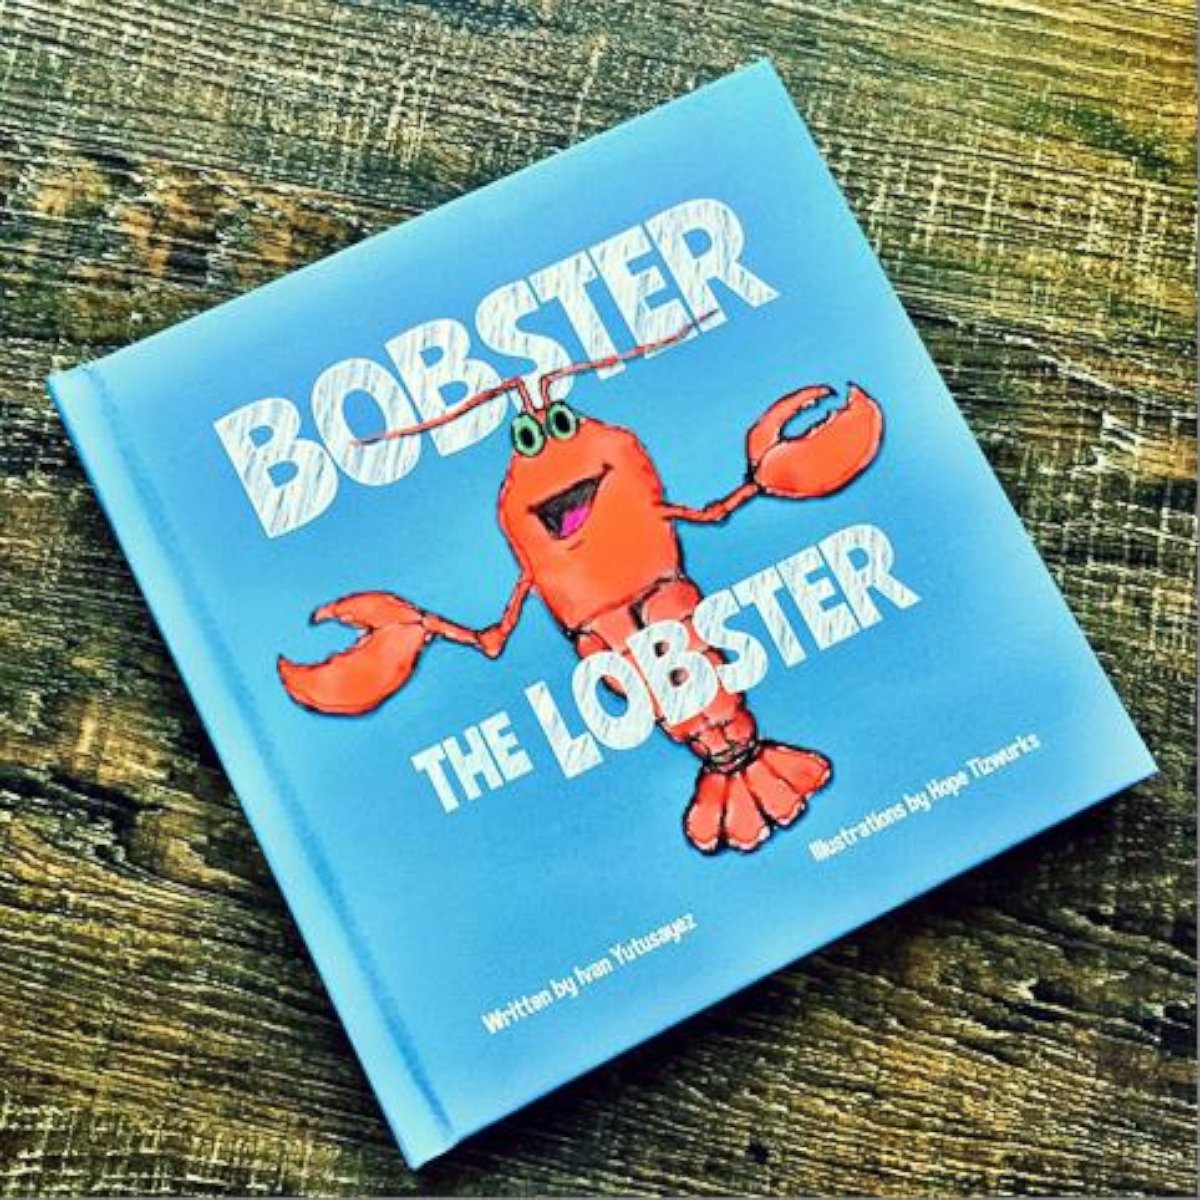 PHOTO: Joe Graceffa, 38, proposed to Elsa Cramer, 32, with a creative children's book he wrote and illustrated titled "Bobster The Lobster."